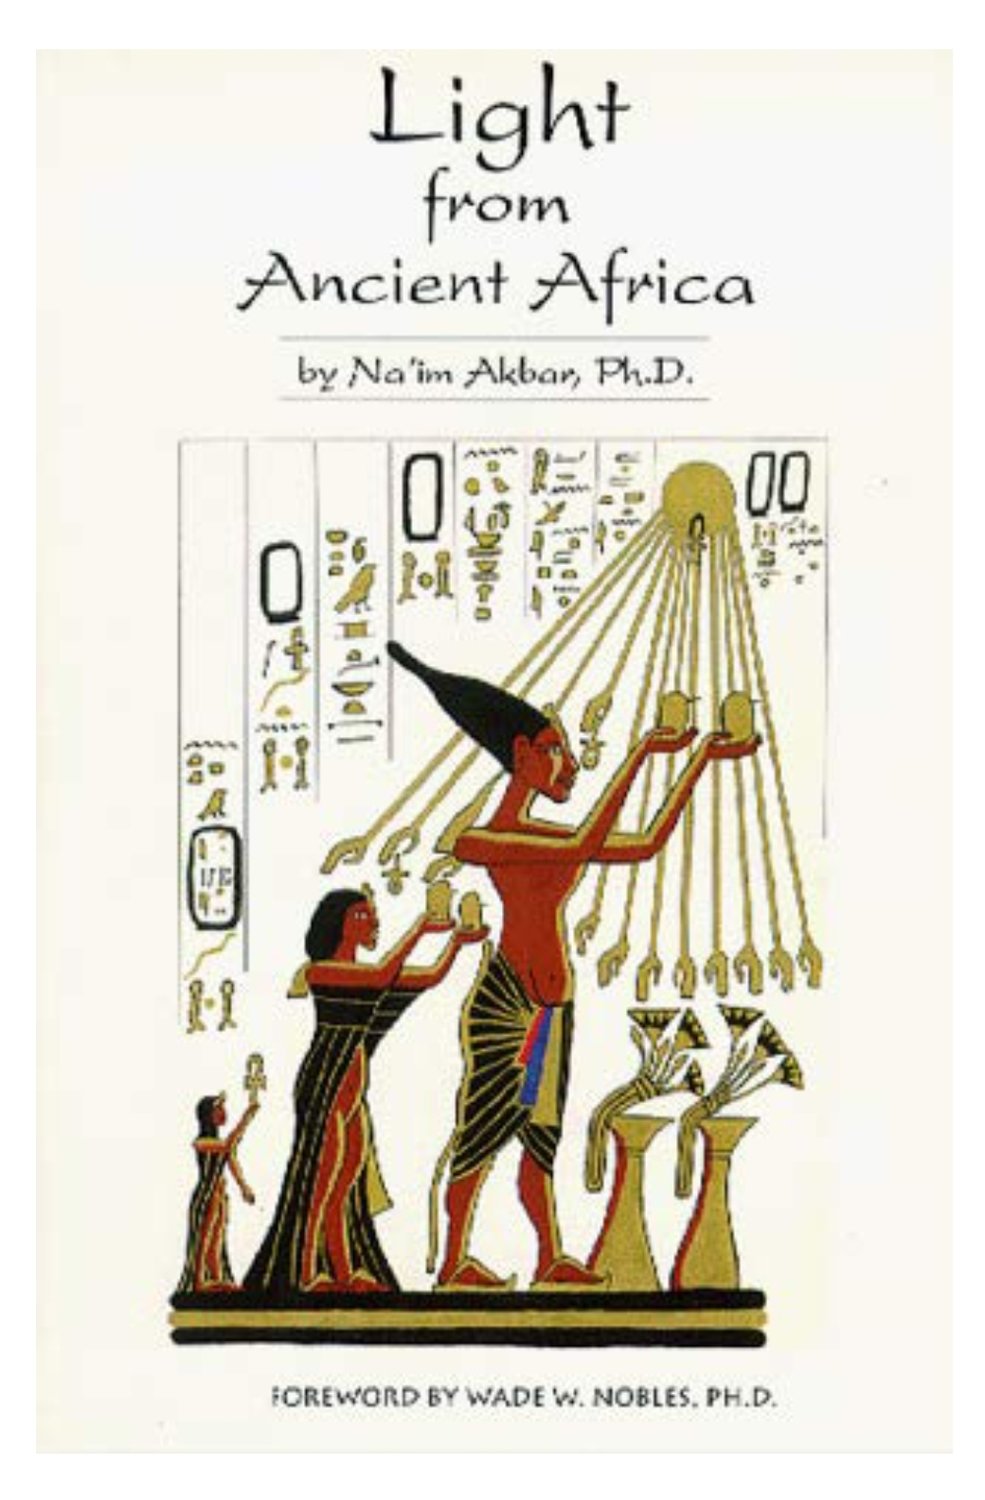 Light from Ancient Africa by Na'im Akbar